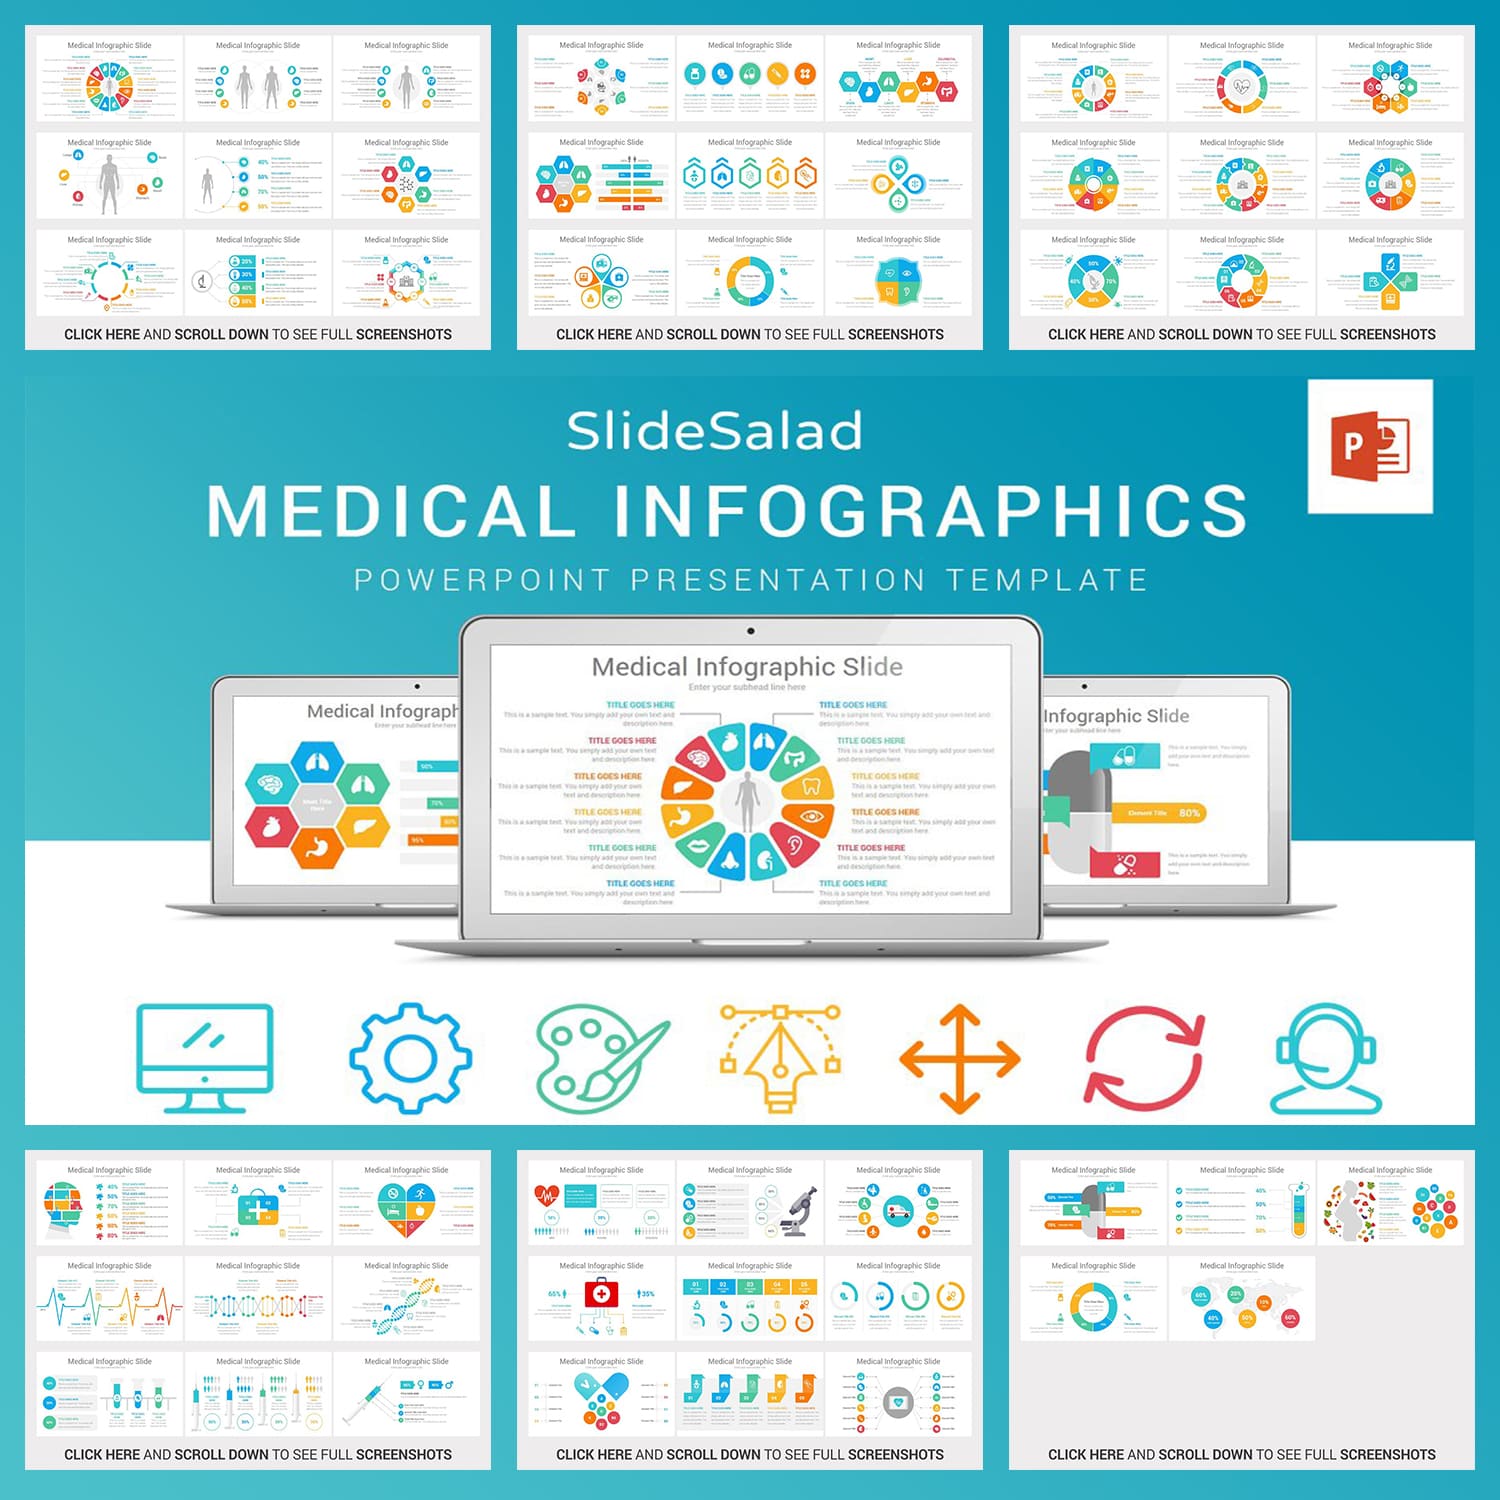 Medical Infographics PowerPoint cover.